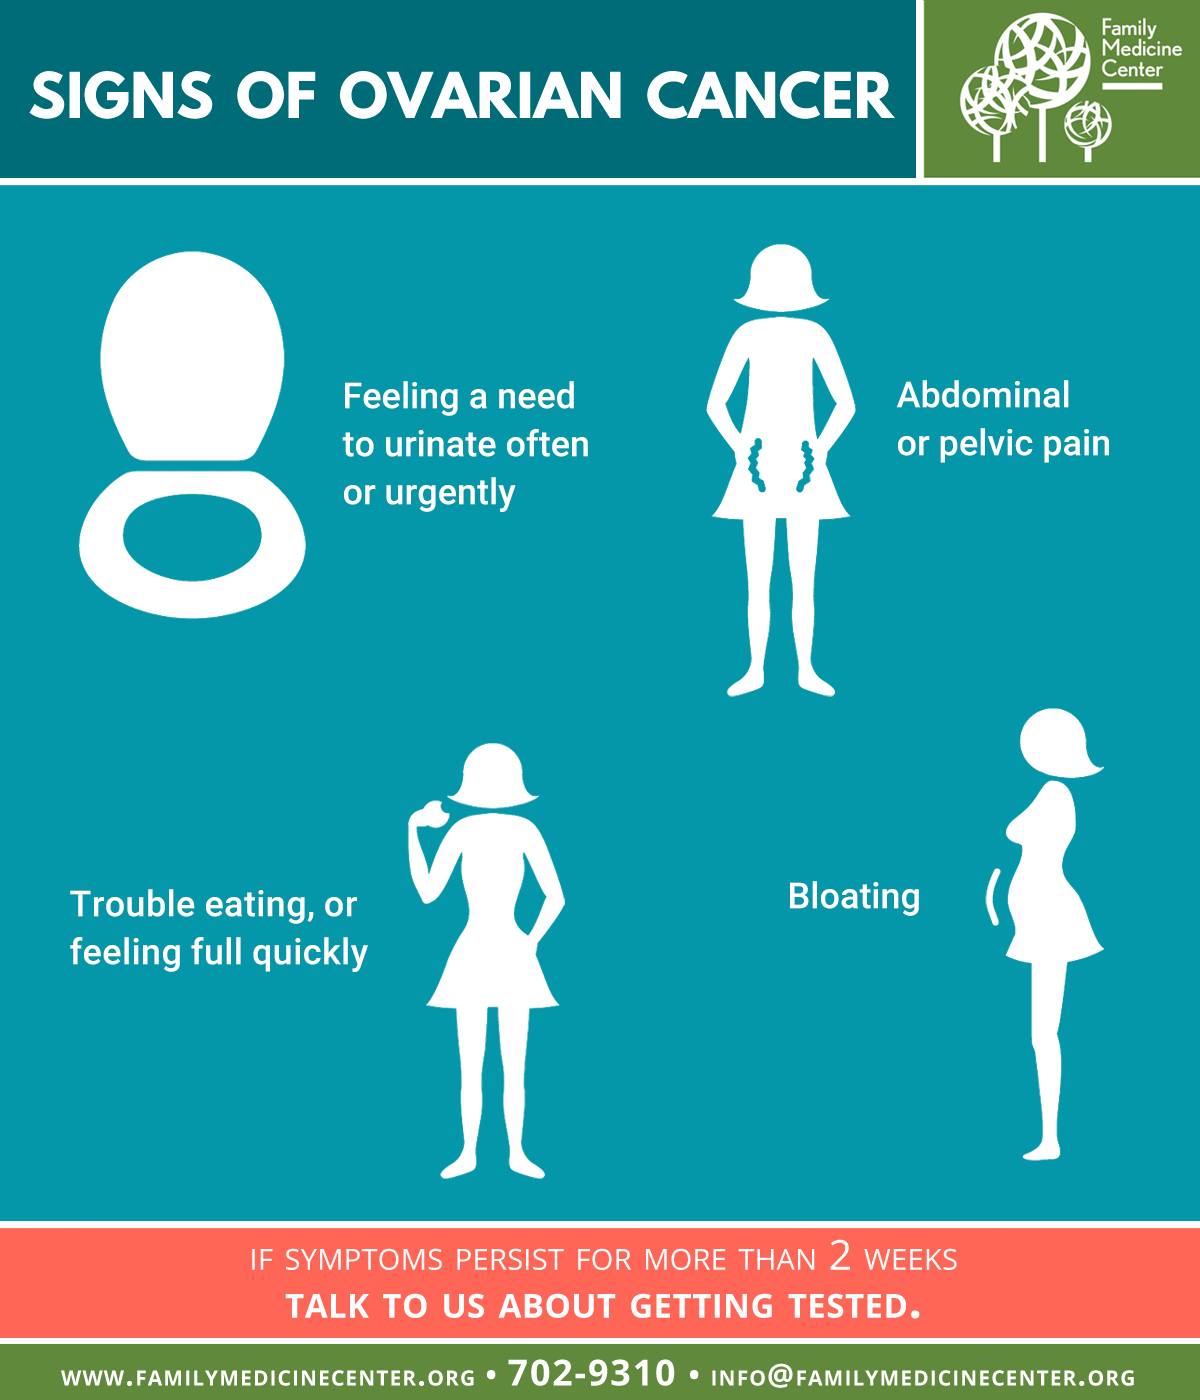 Signs of Ovarian Cancer – Family Medicine Center